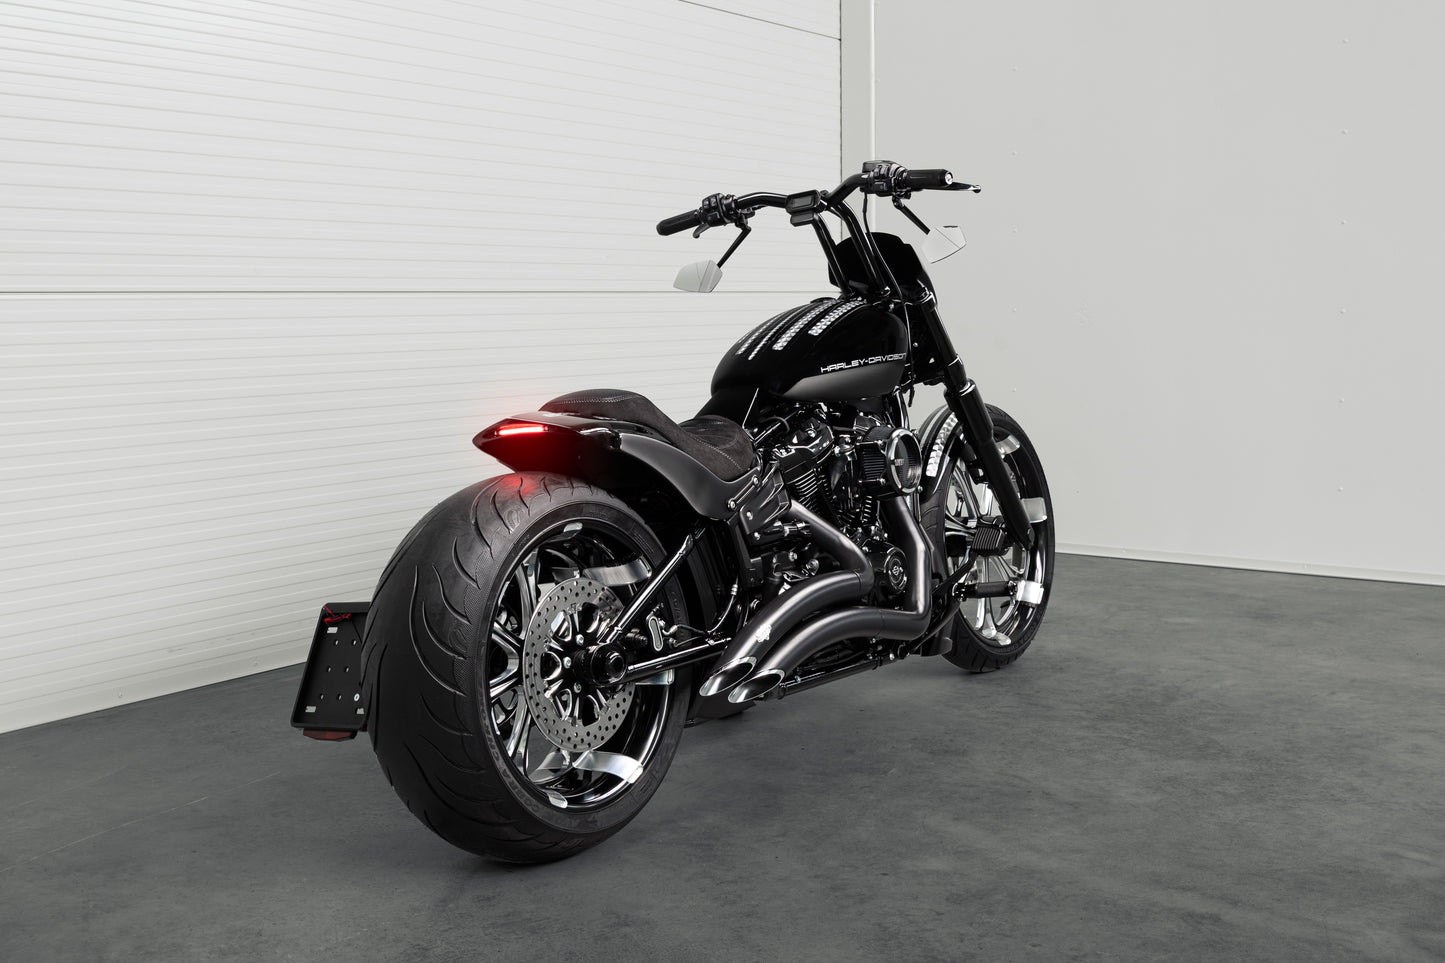 Harley Davidson motorcycle with Killer Custom "Race" mirrors from the rear in a white modern garage